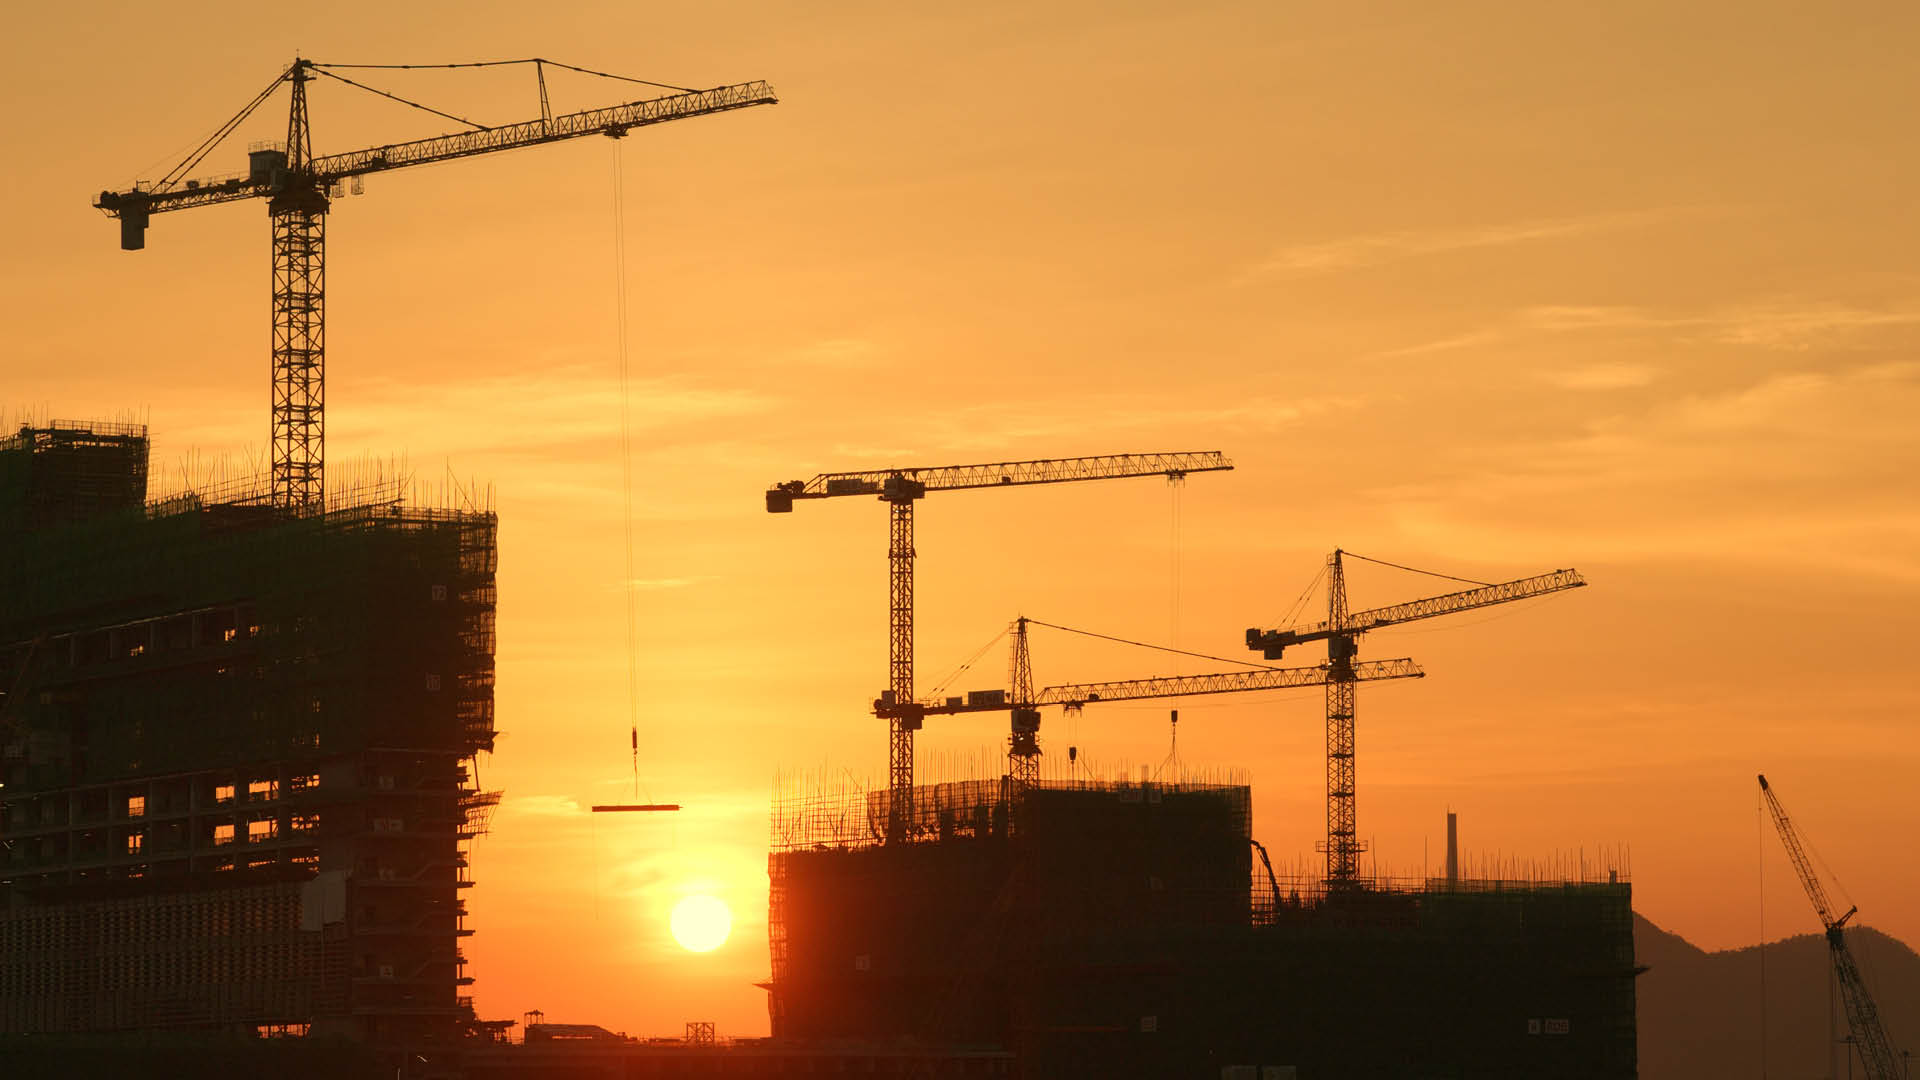 Silhouette-of-the-construction-site-on-sunset